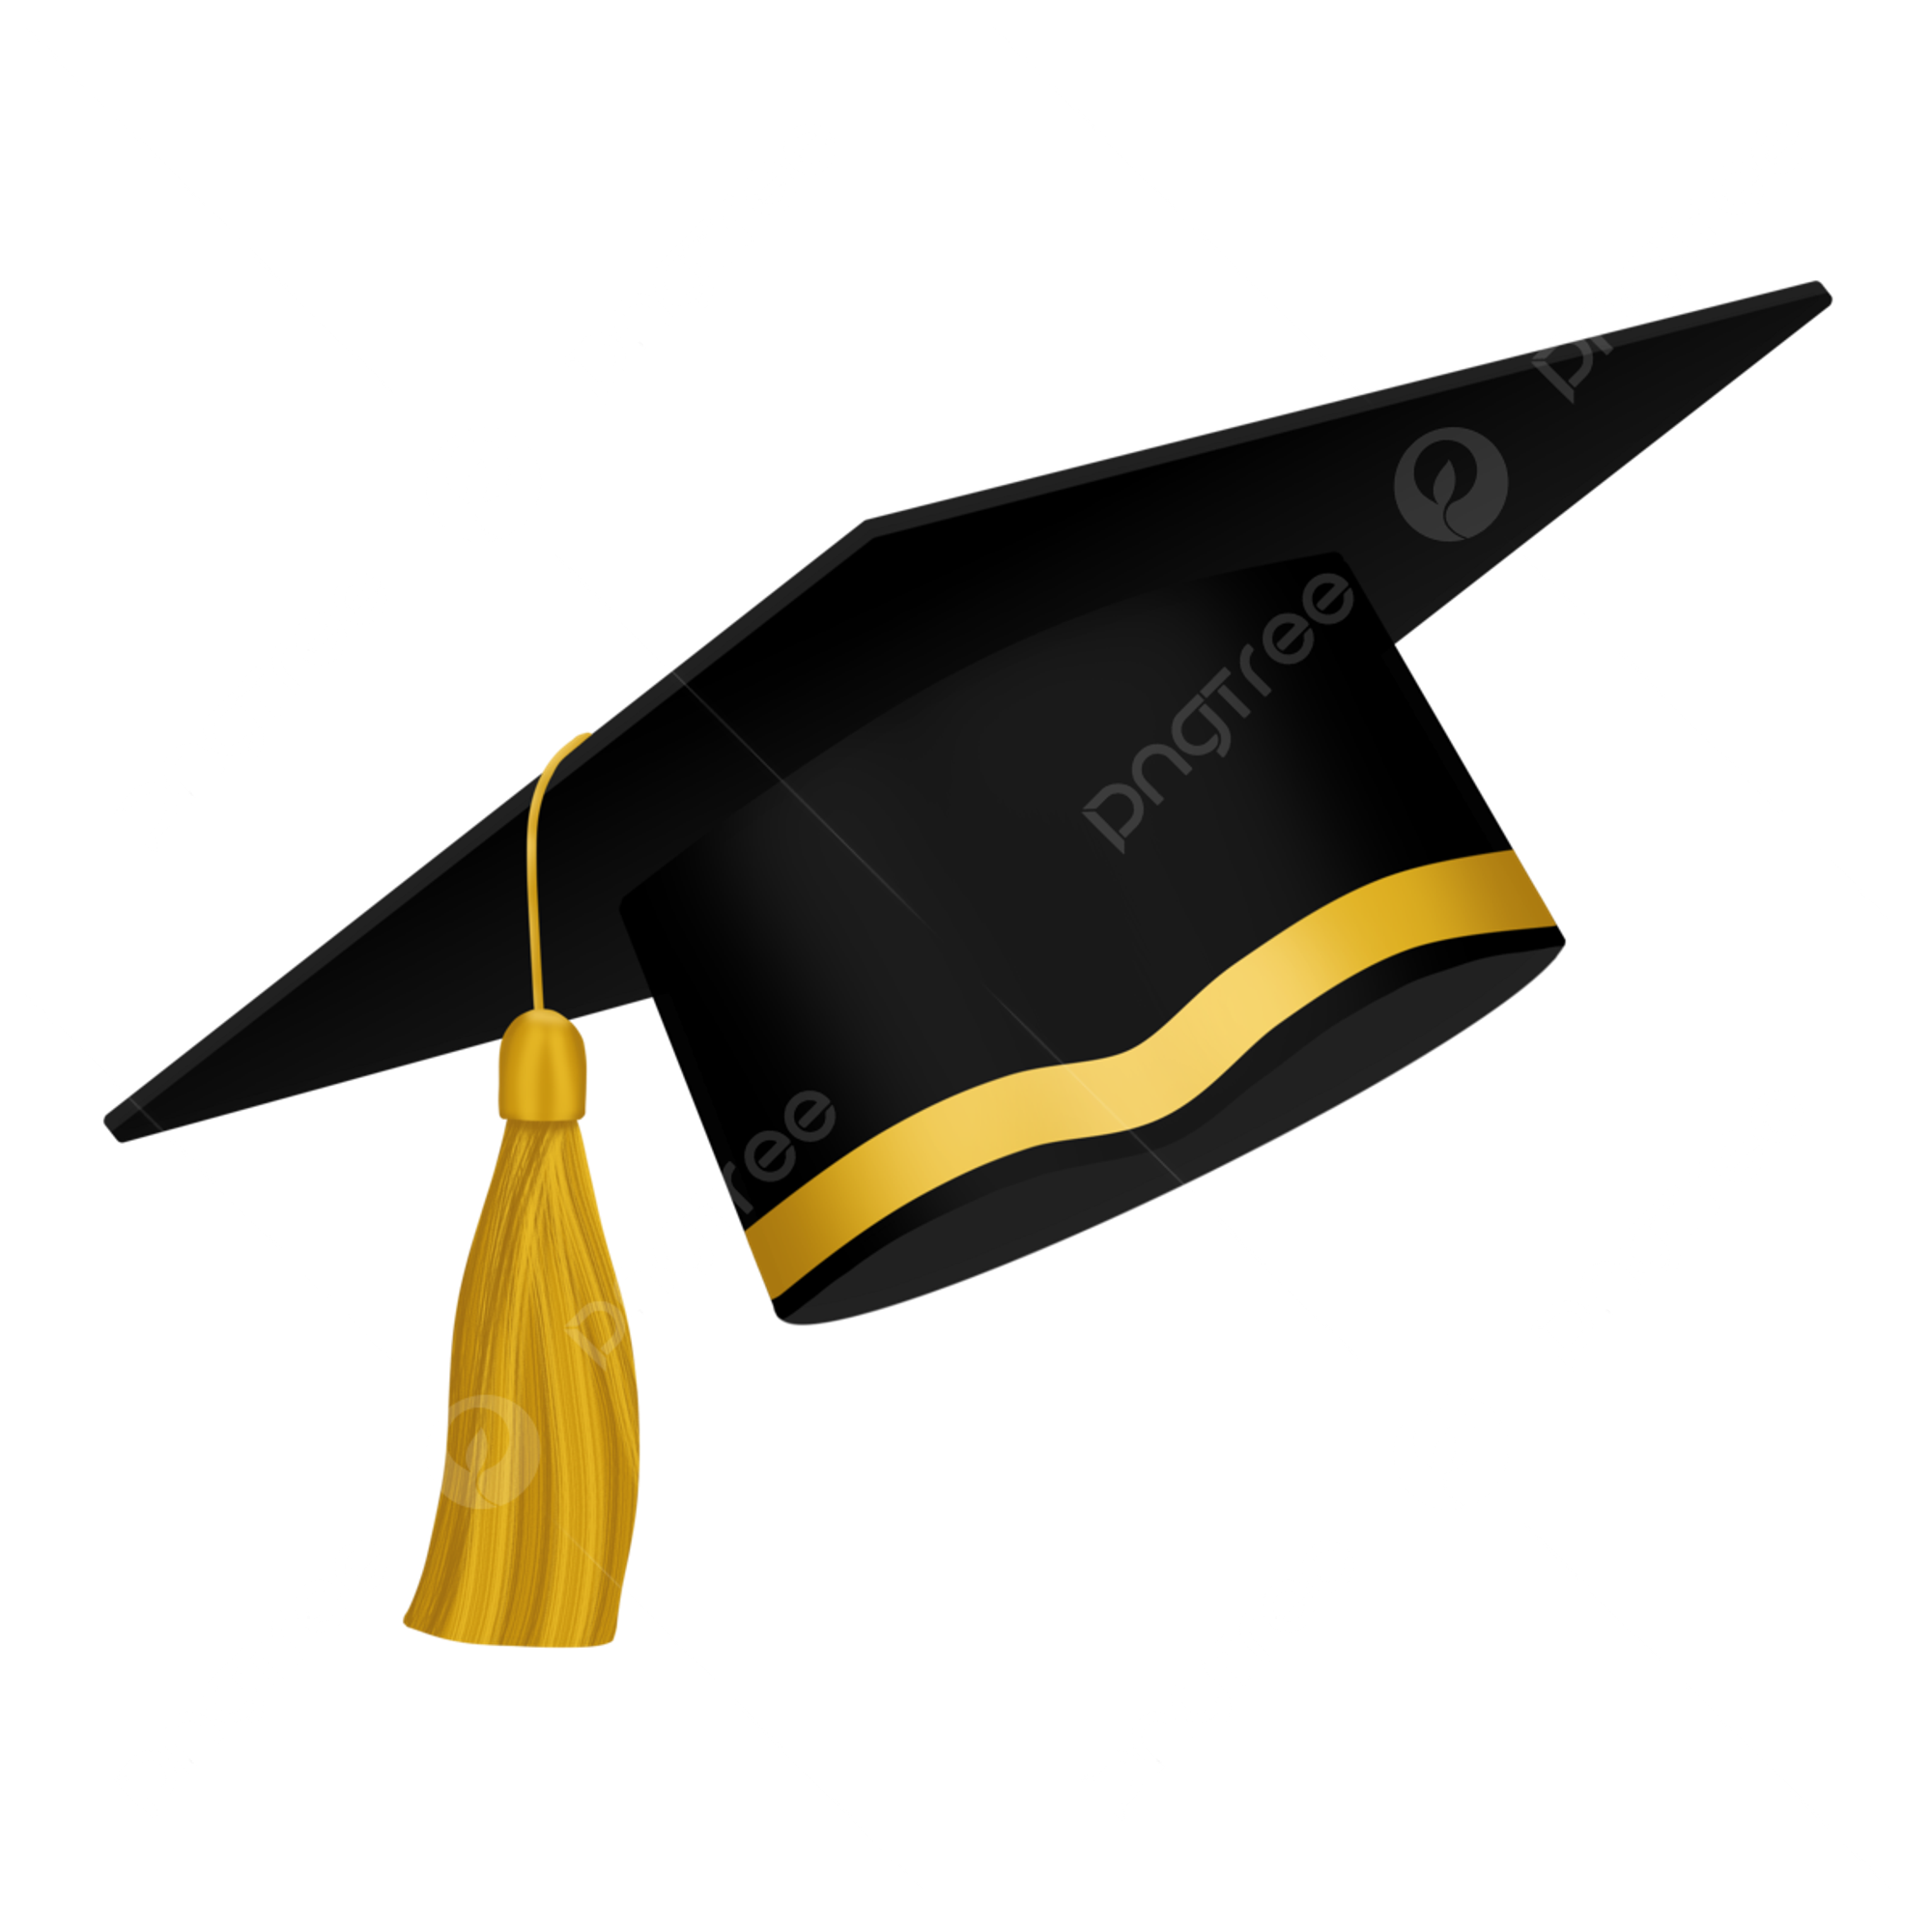 Bachelors Degree in Computer Science  Pragati Engineering College, India
Aug 14 - April 18